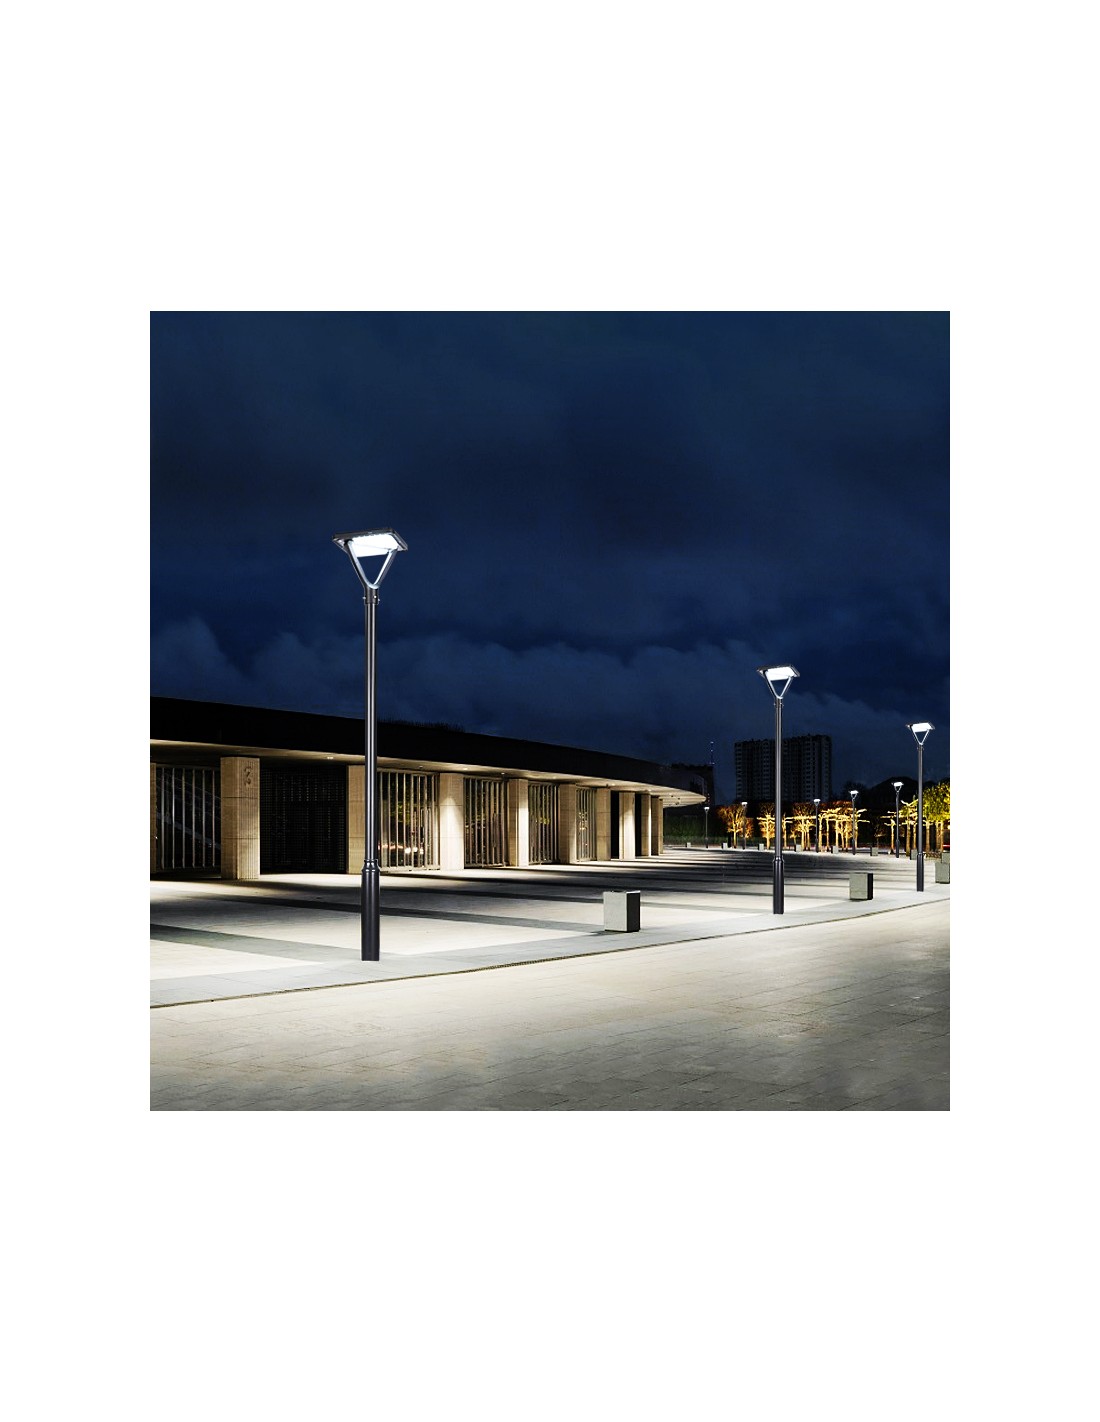 LAMPADAIRE LED SOLAIRE ROBUSTE 60W REF: CB-WLSN60W